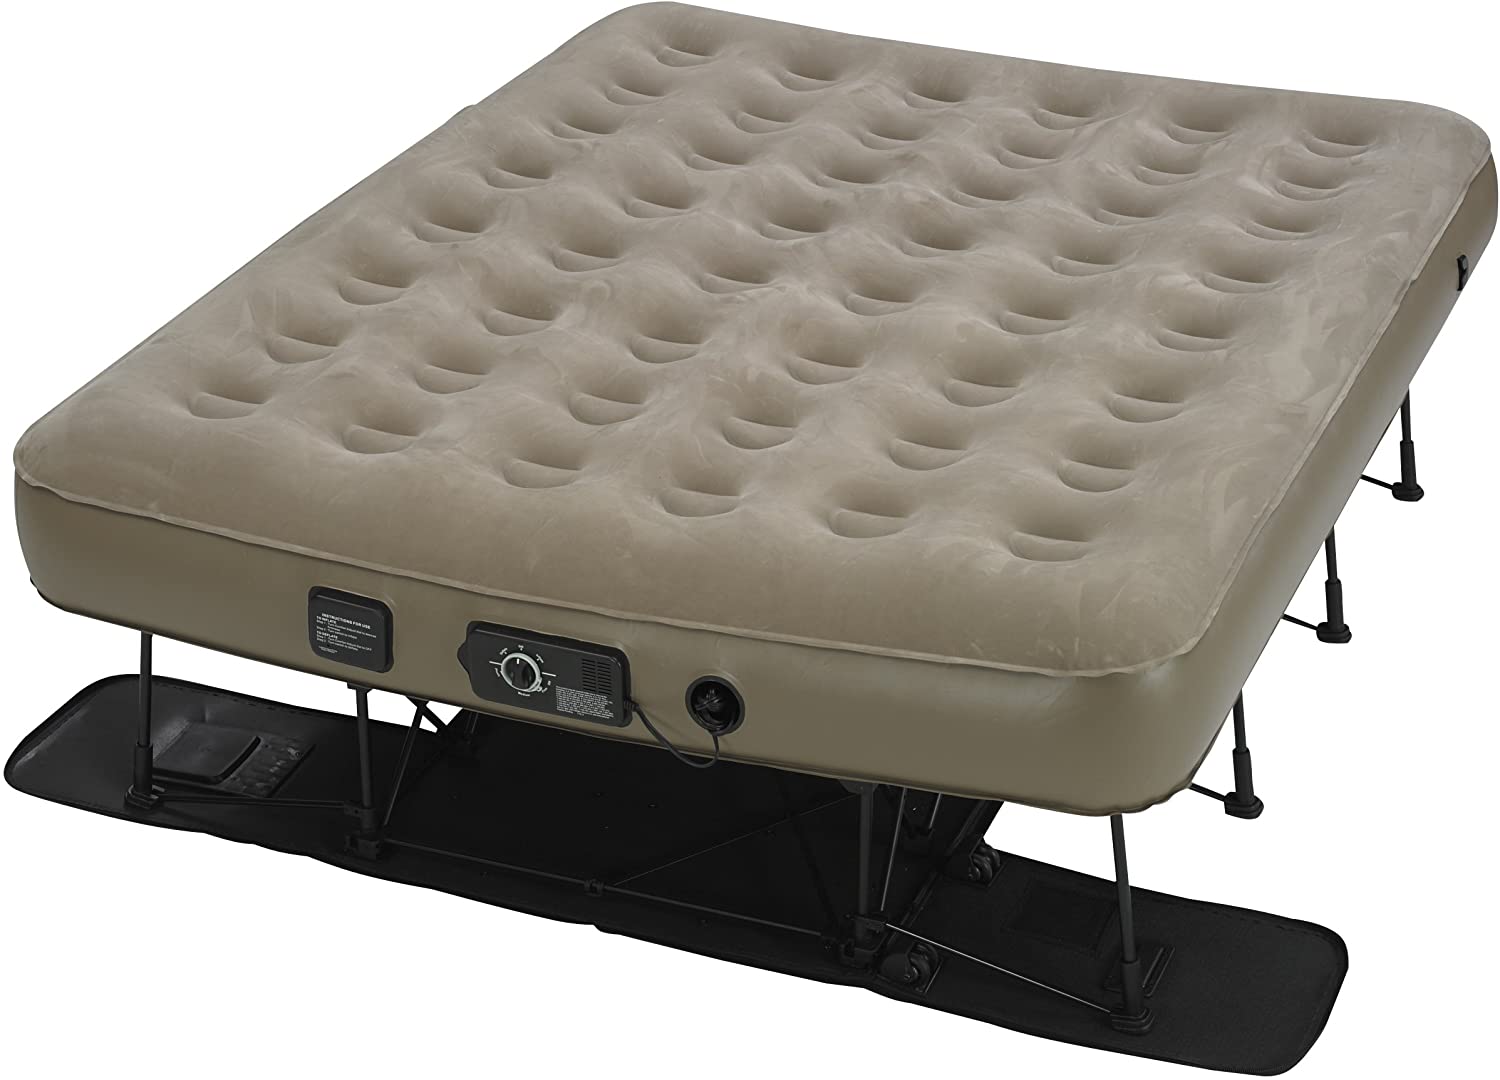 best cot mattress for camping